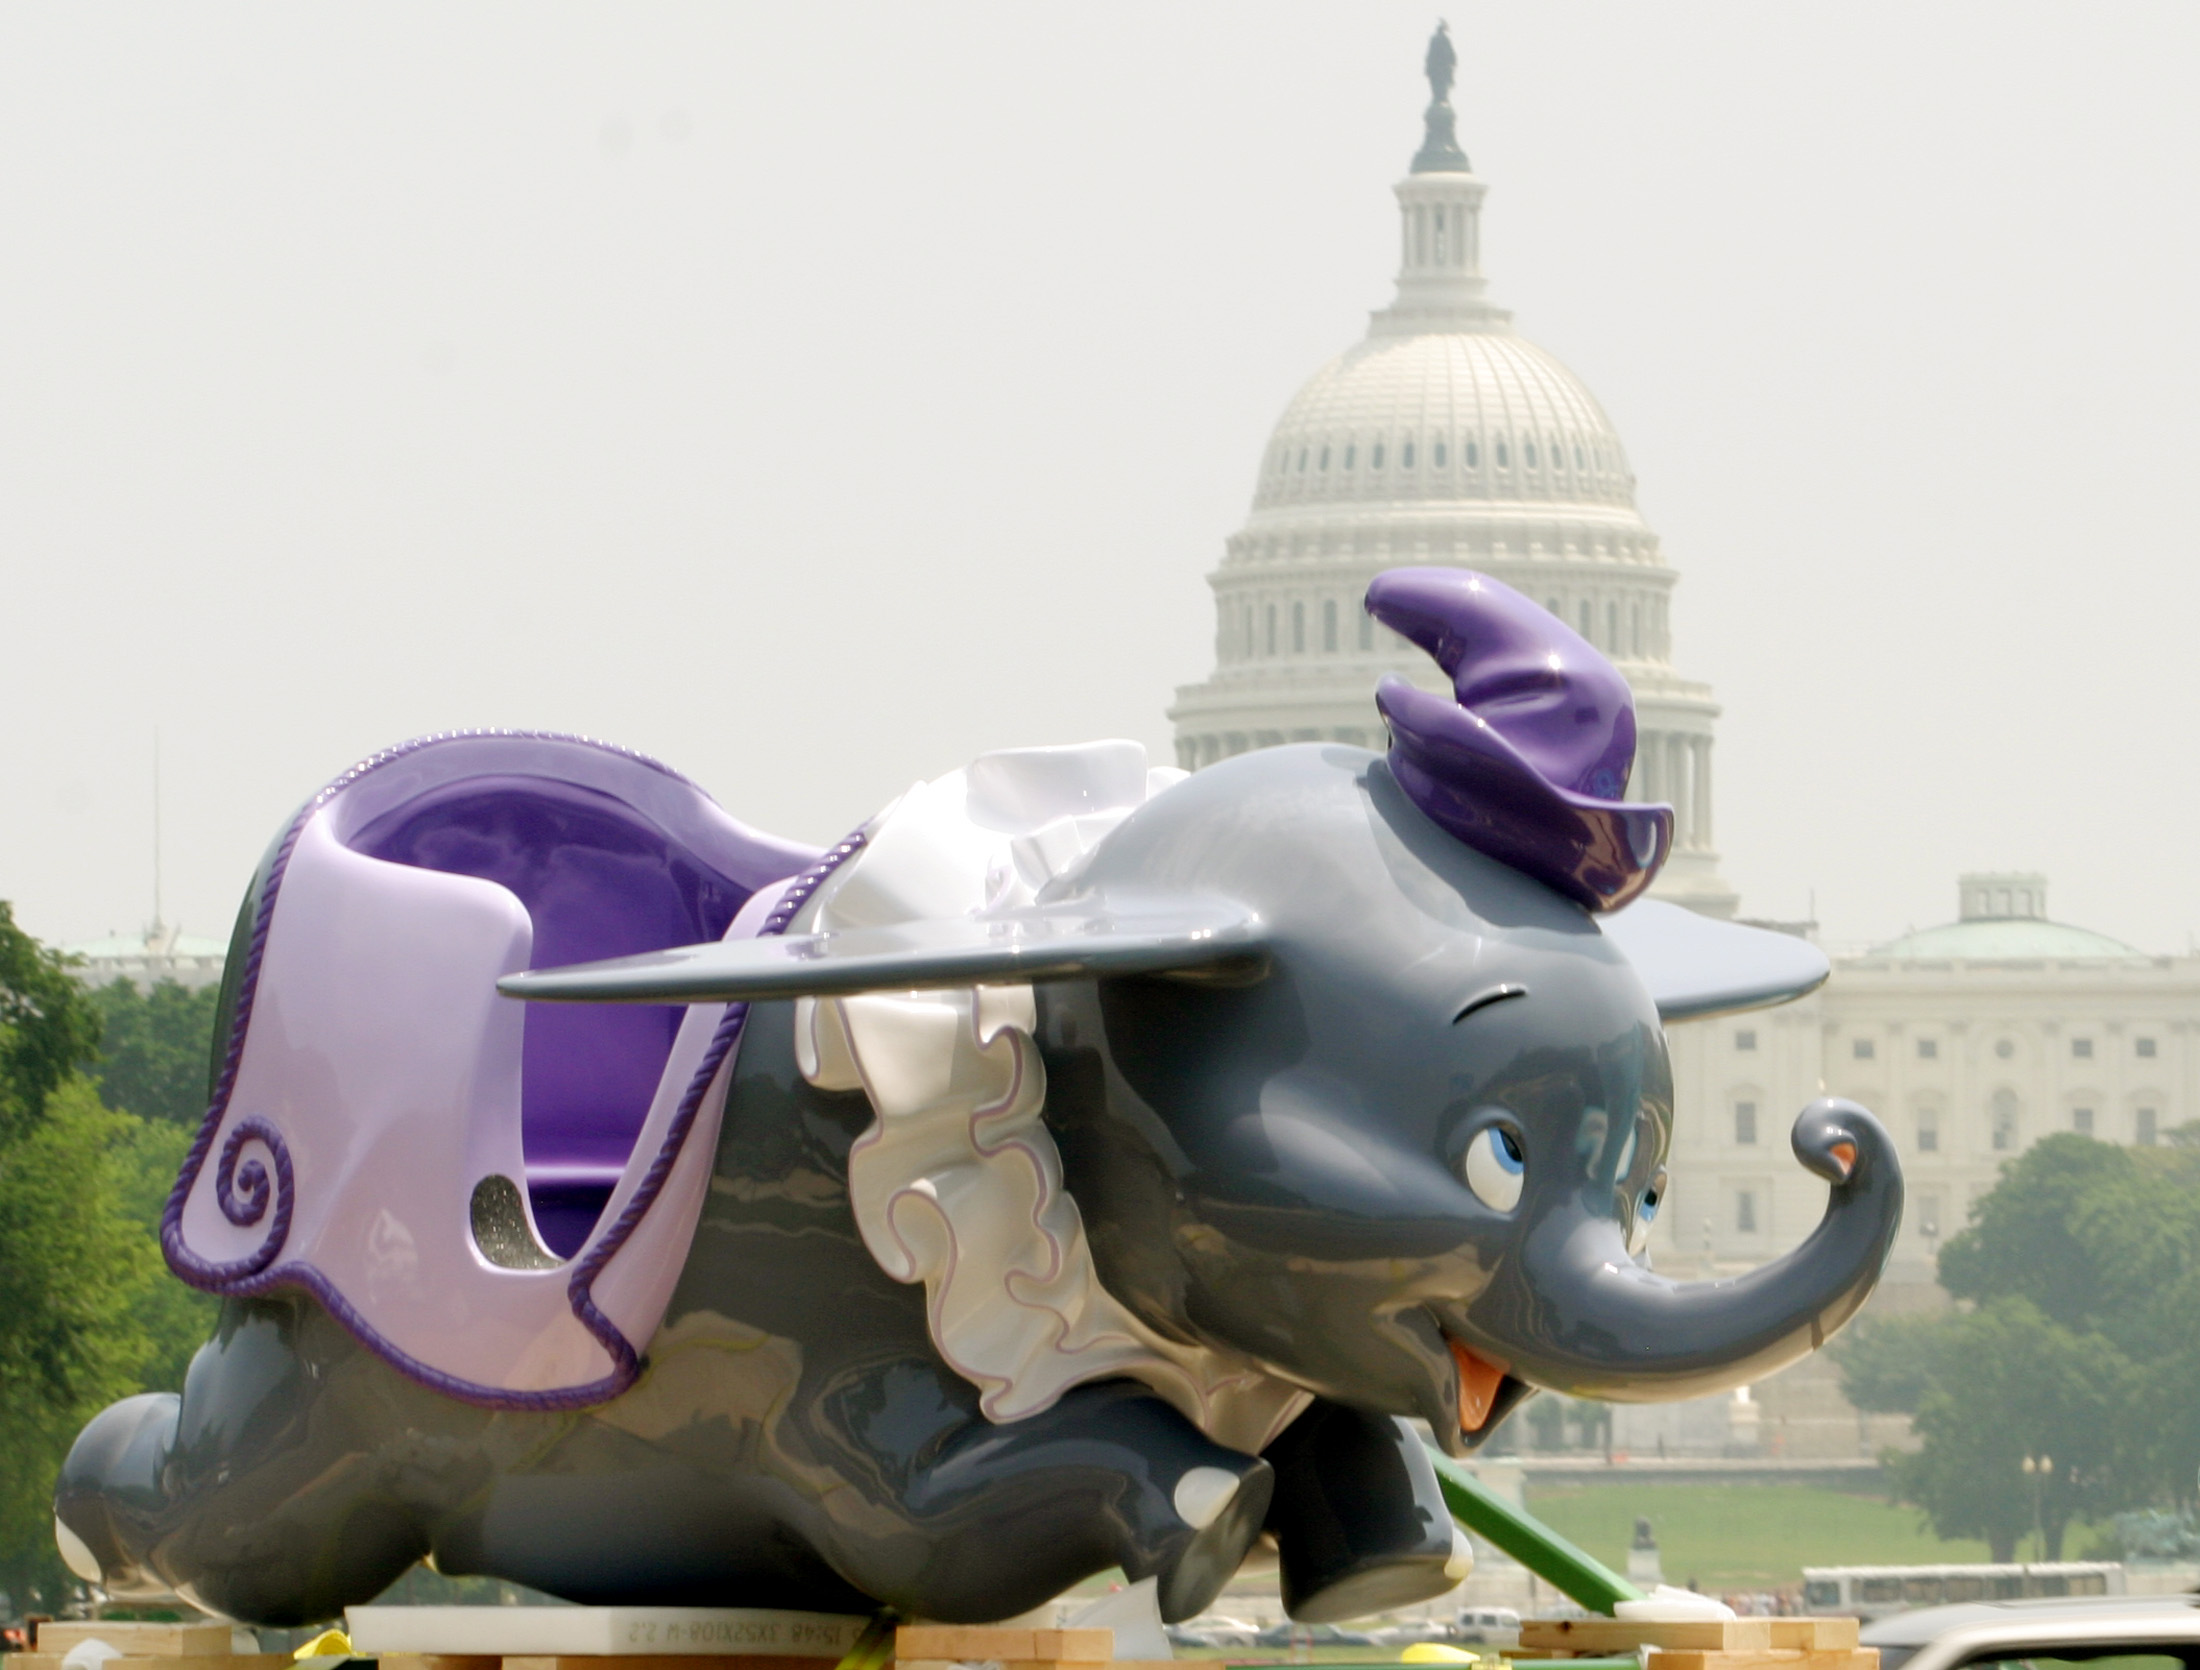 A Disneyland ride from their 1955 opening year, Dumbo from "Dumbo the Flying Elephant", is paraded around the National Mall in Washington D.C. with the U.S. Capitol in the background, June 6, 2005. Walt Disney CEO Michael Eisner will present two ride vehicles, including Dumbo, to the National Museum of American History on June 9 as Disneyland gets ready to celebrate its 50th anniversary on July 17. REUTERS/Molly Riley MR/CN